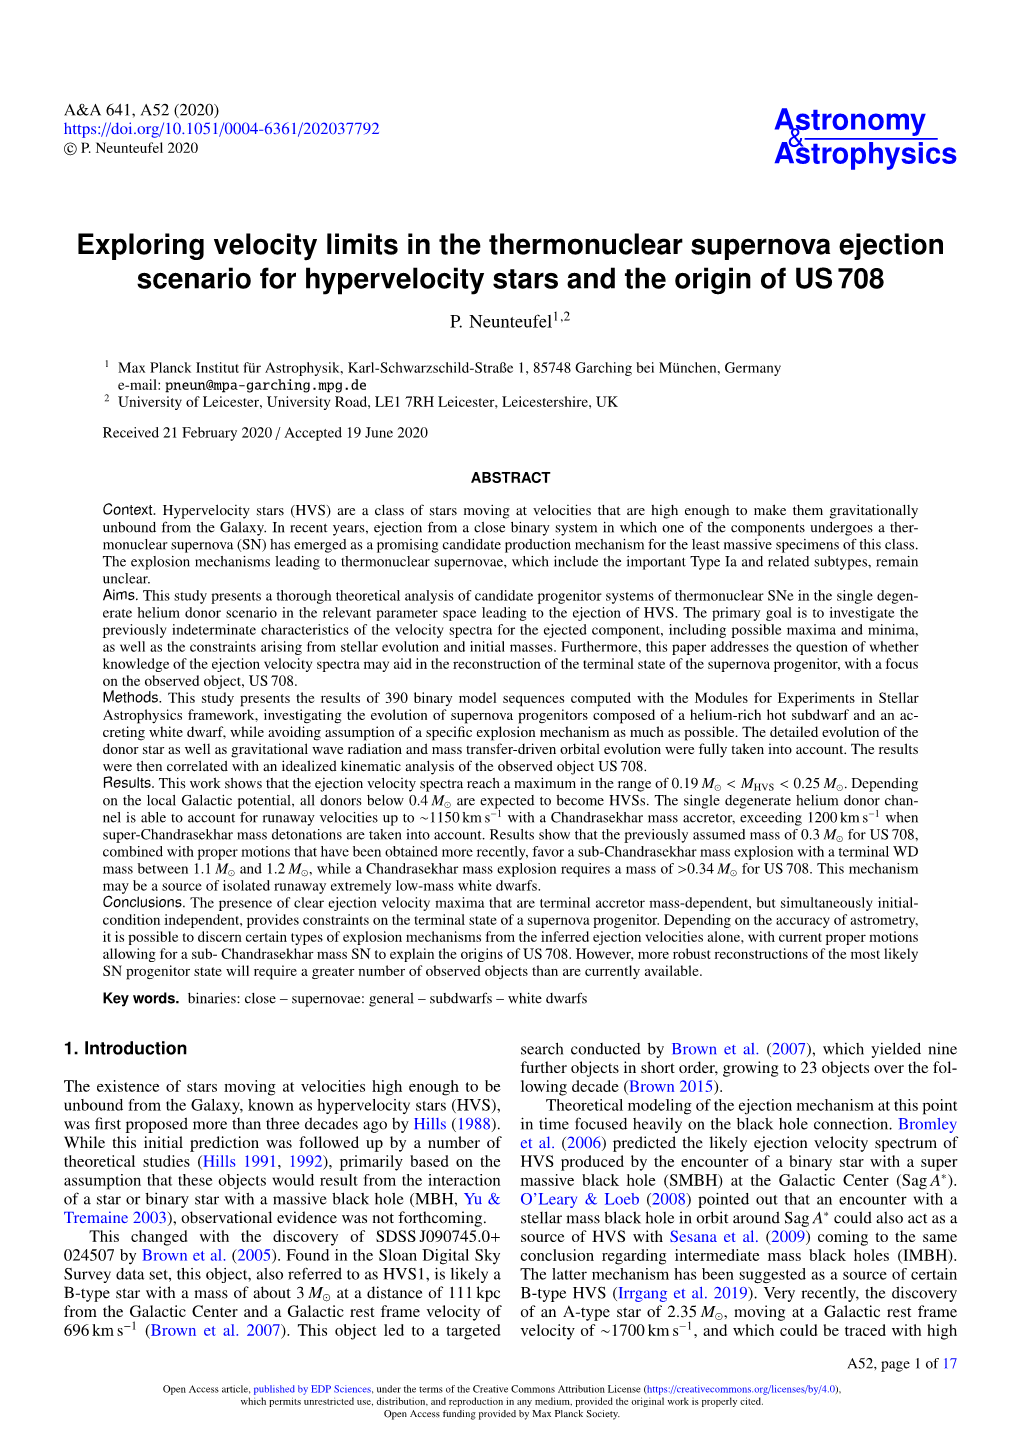 Exploring Velocity Limits in the Thermonuclear Supernova Ejection Scenario for Hypervelocity Stars and the Origin of US 708